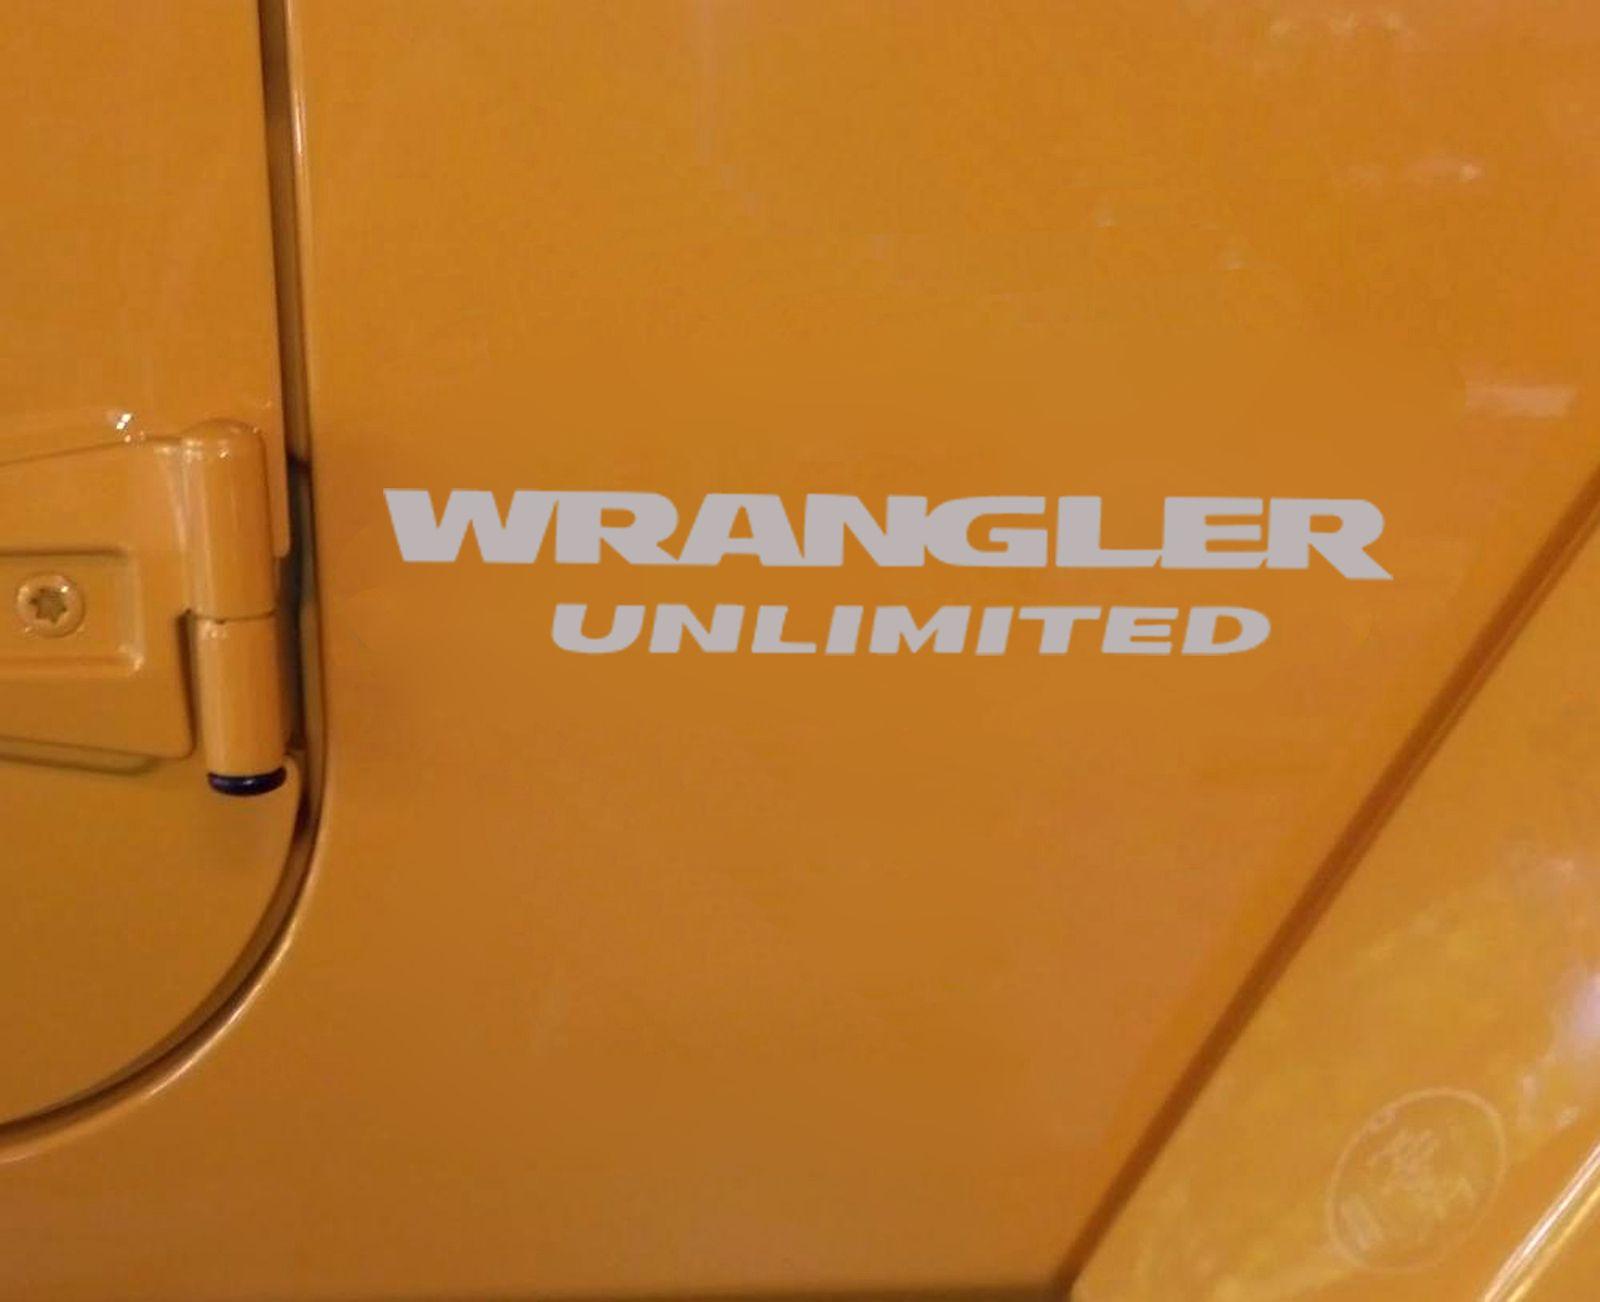 Jeep Wrangler Unlimited Logo - Jeep Wrangler Unlimited Replacement Stock and 48 similar items